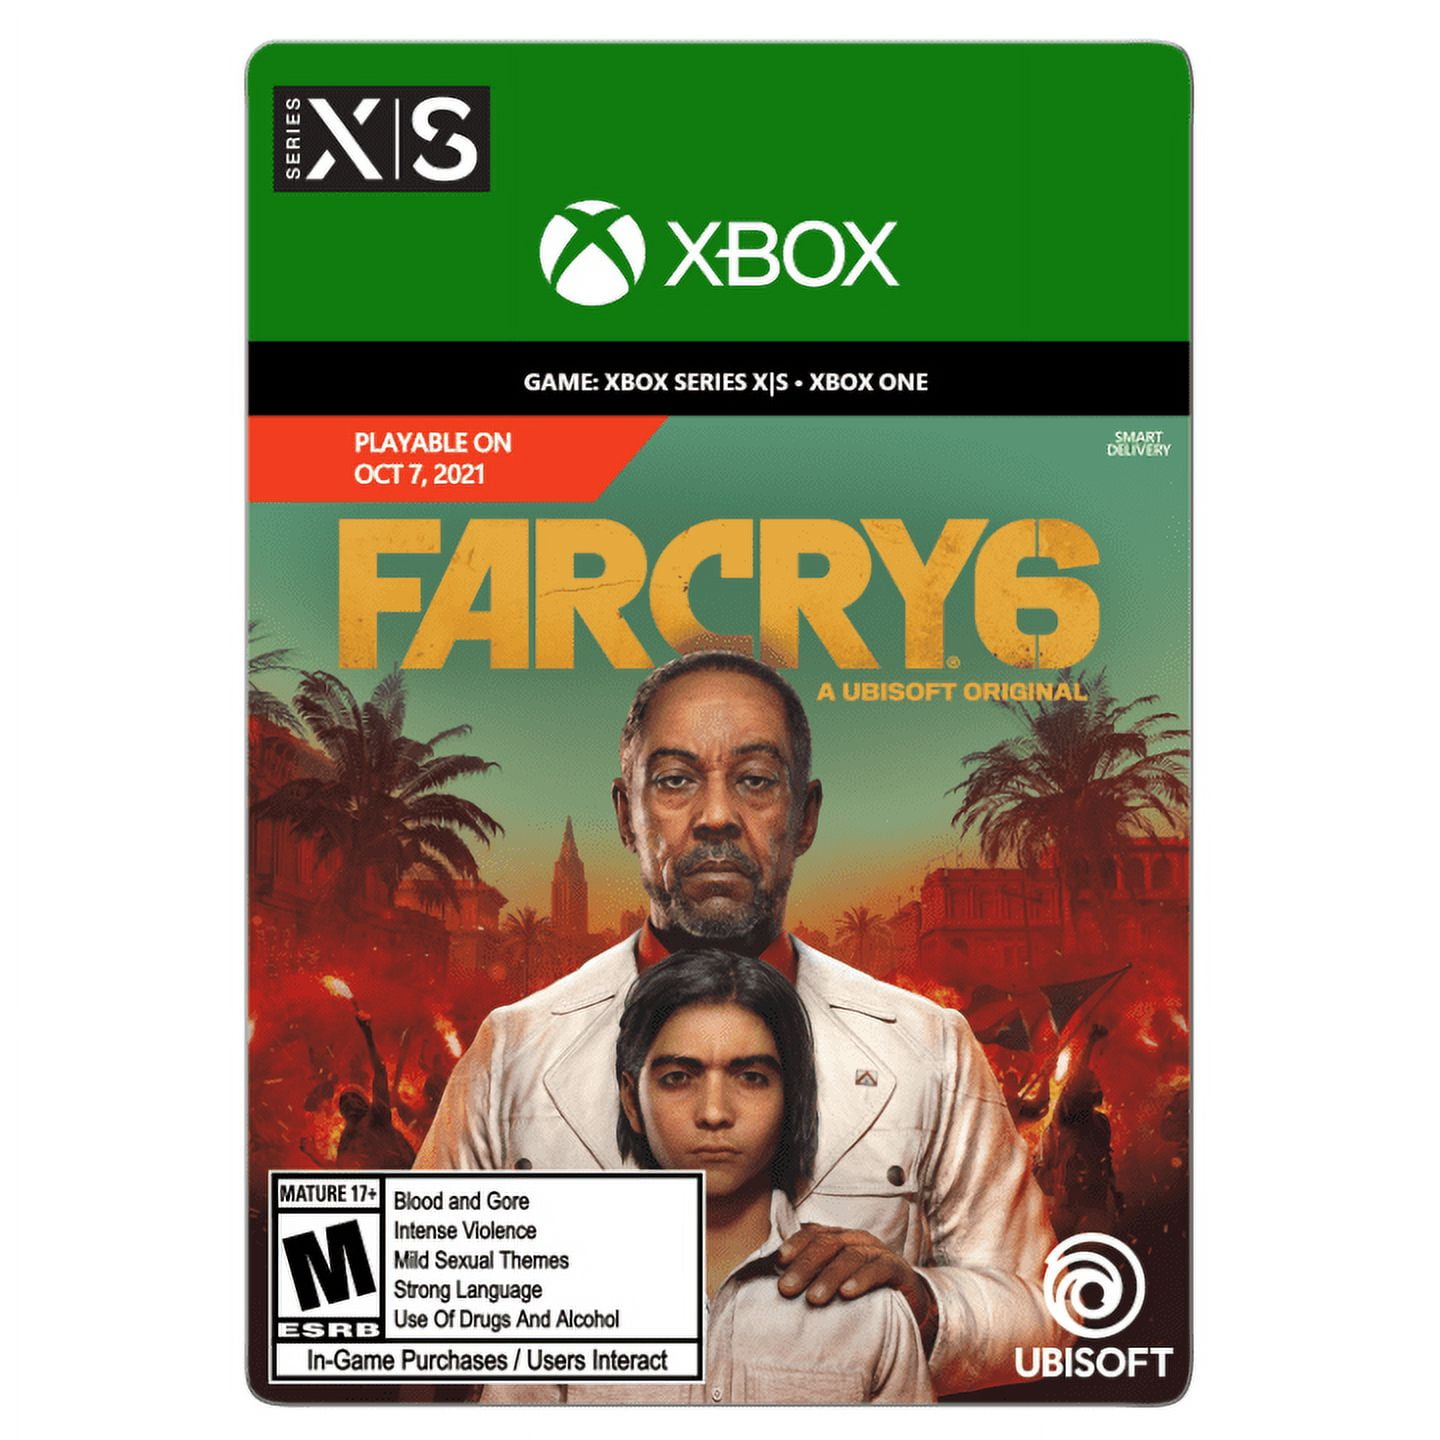 Far Cry 6 (Reviewed on Xbox Series S)